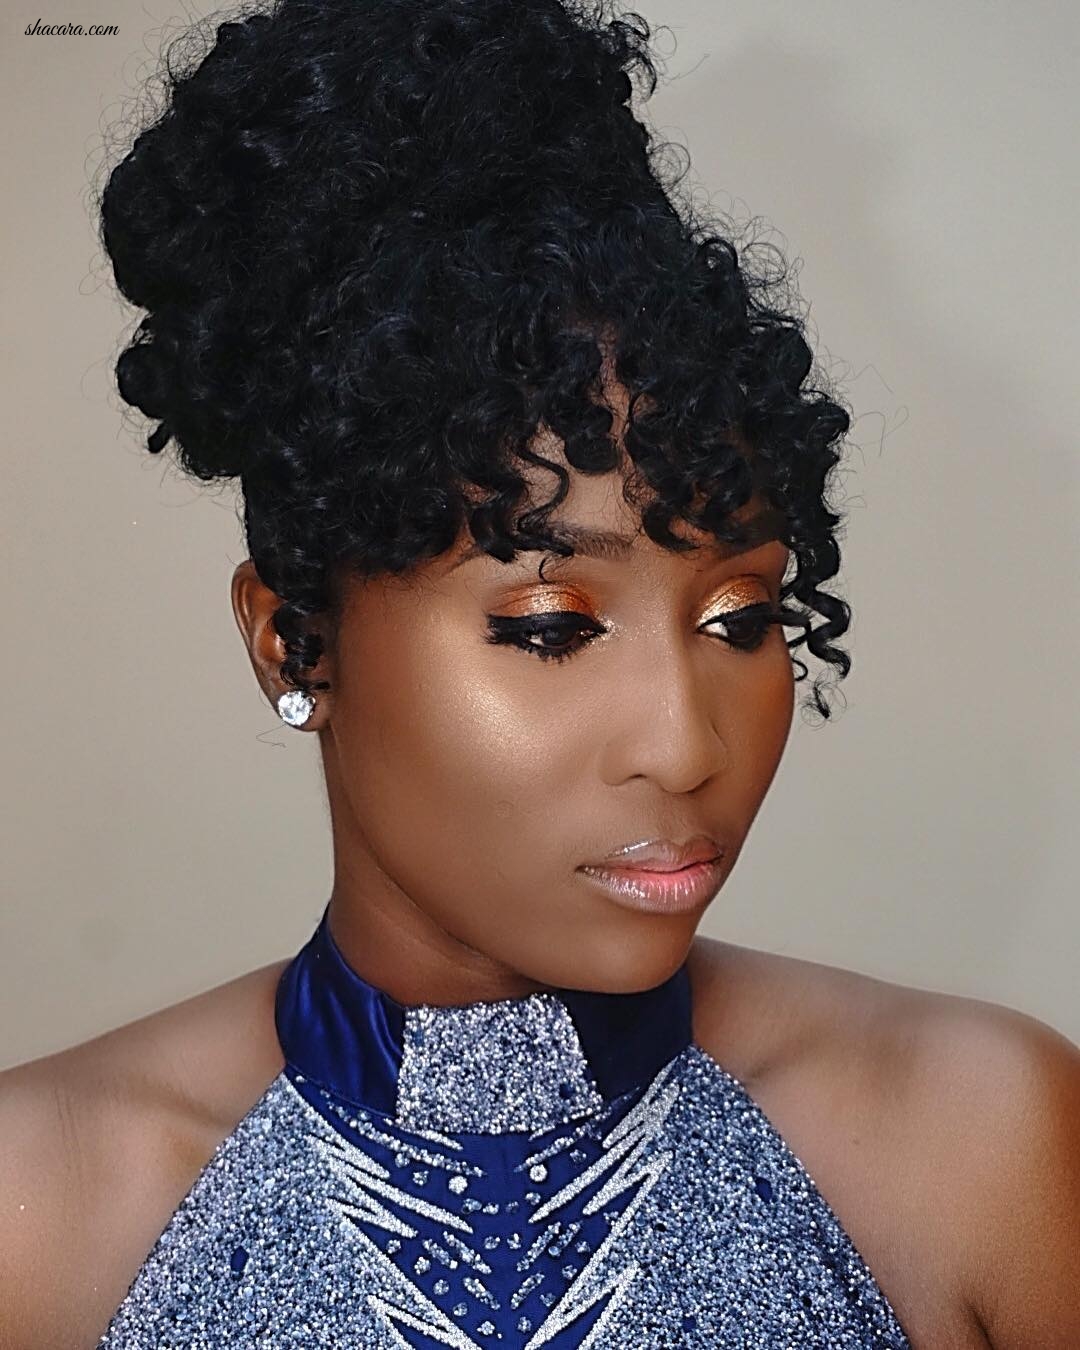 You’ve Got To See Aramide’s Striking Fashion Moment At Her #IWD2019 Music Concert